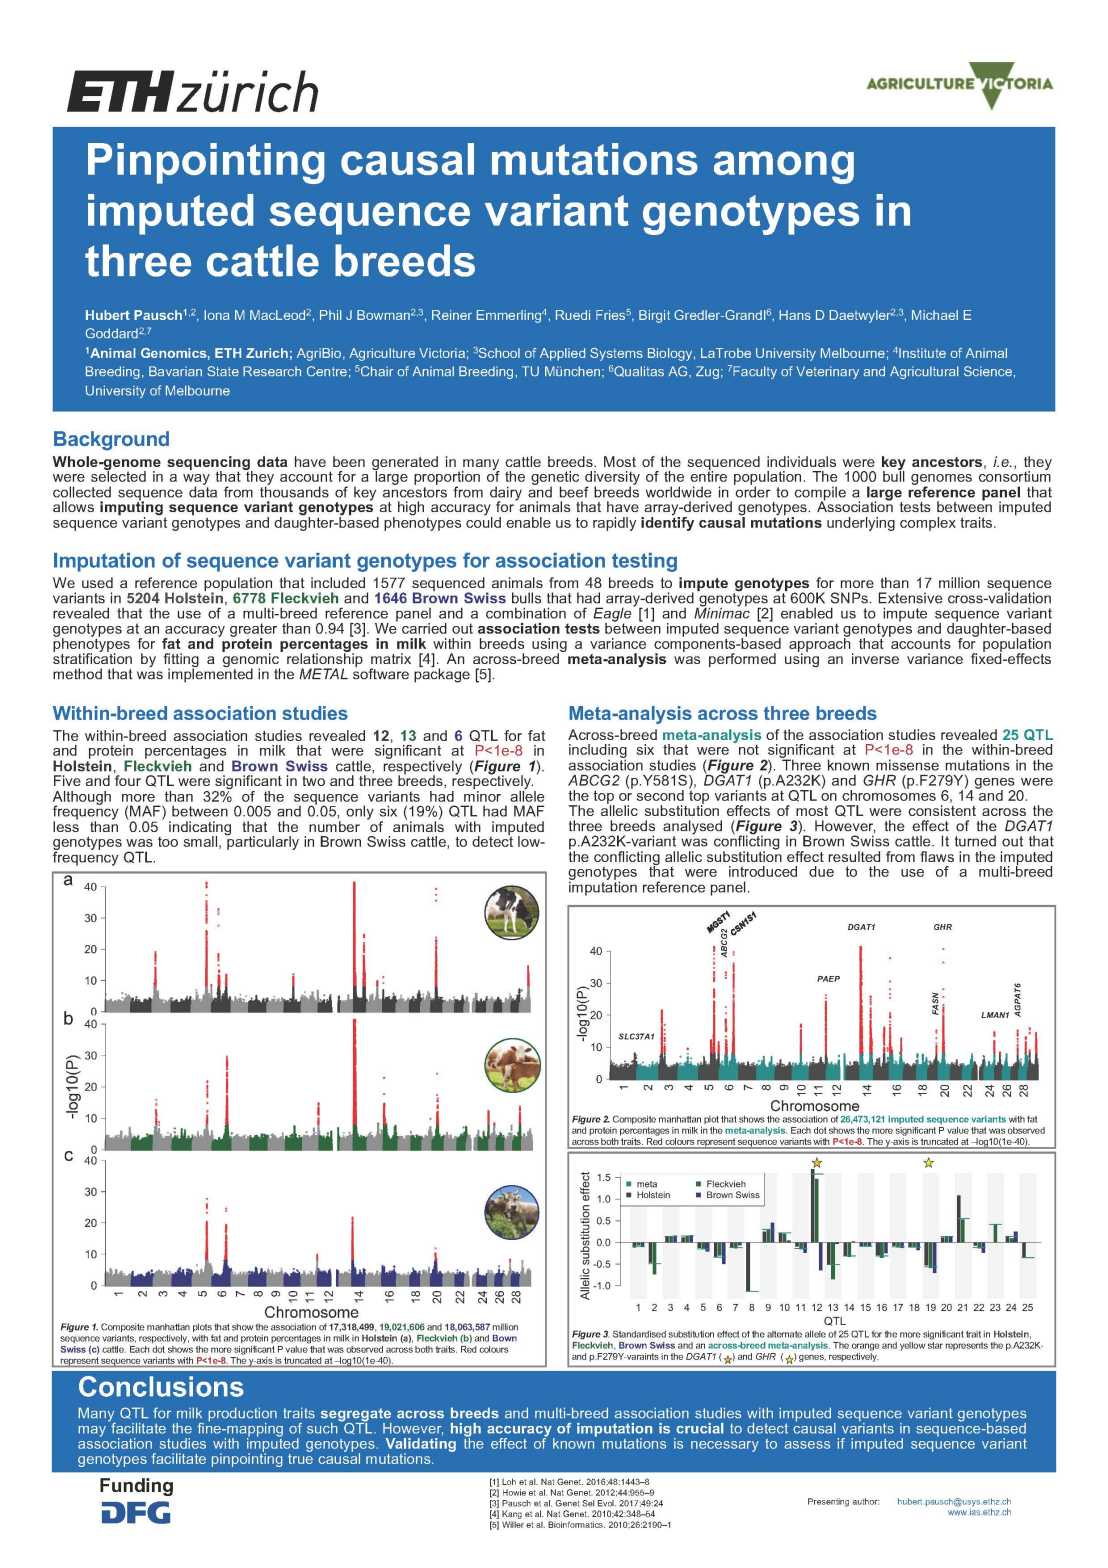 Pinpointing causal mutations among imputed sequence variant genotypes in three cattle breeds